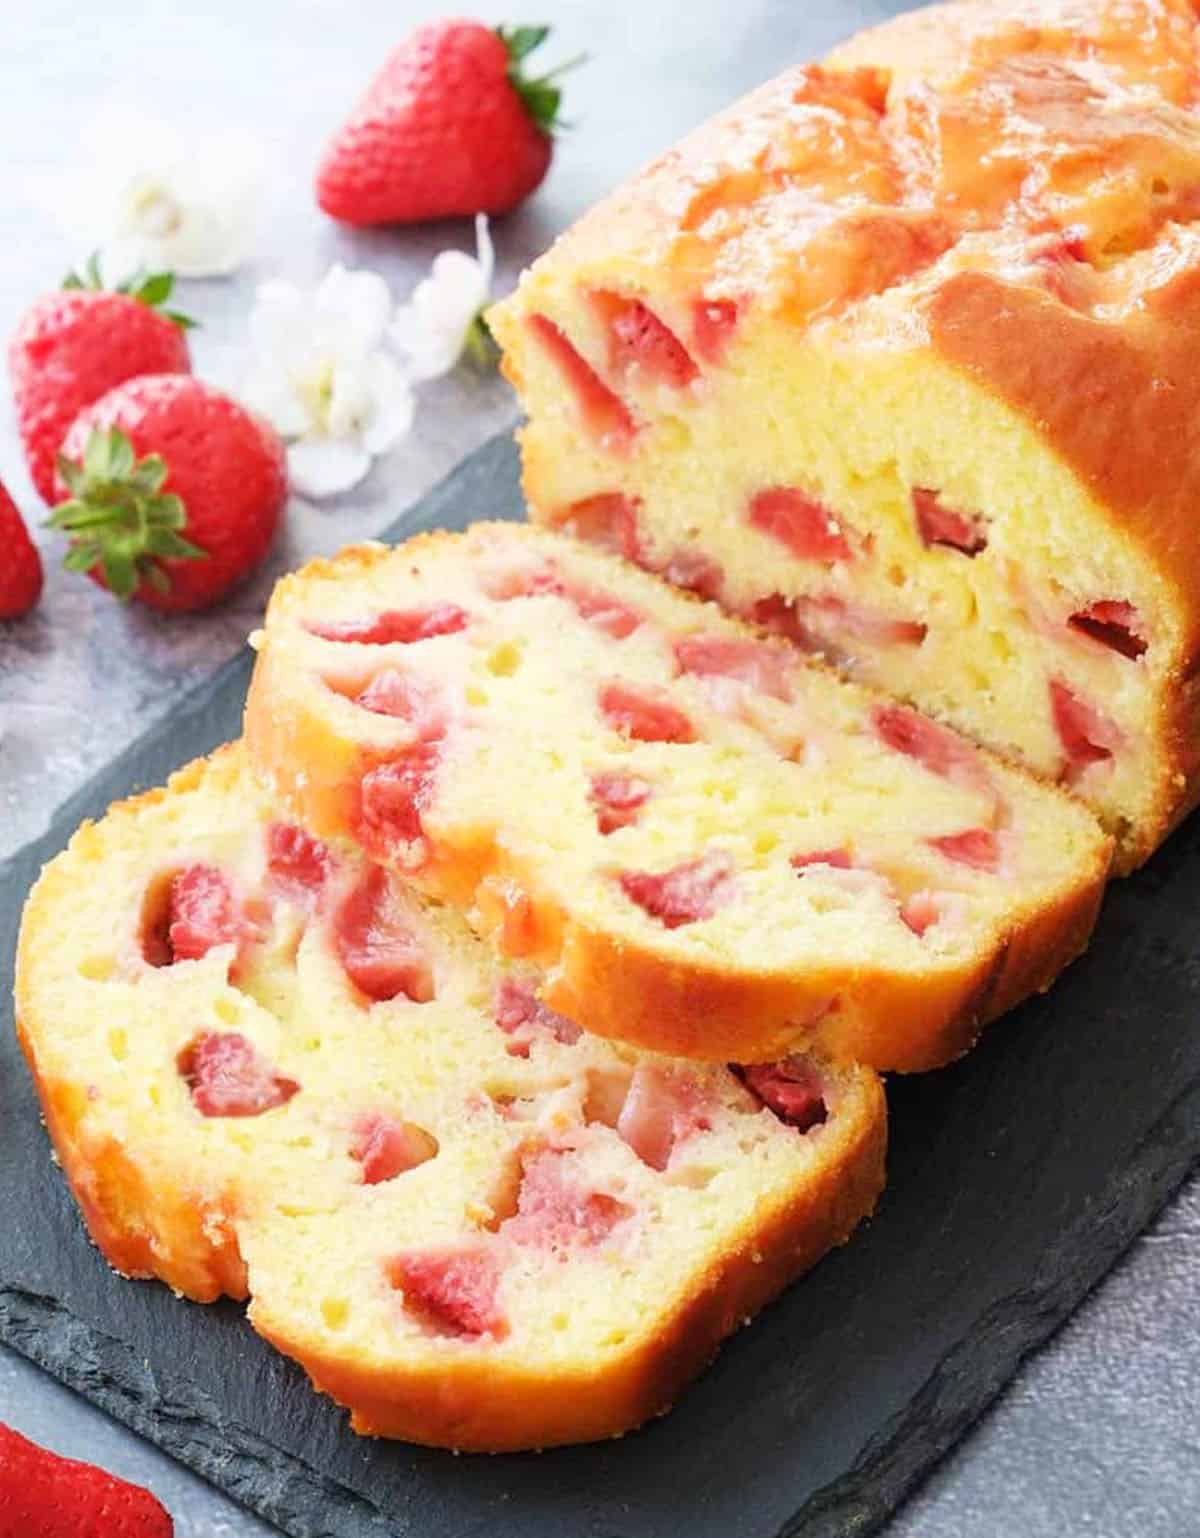 Strawberry bread cut into slices on a black slate tray.